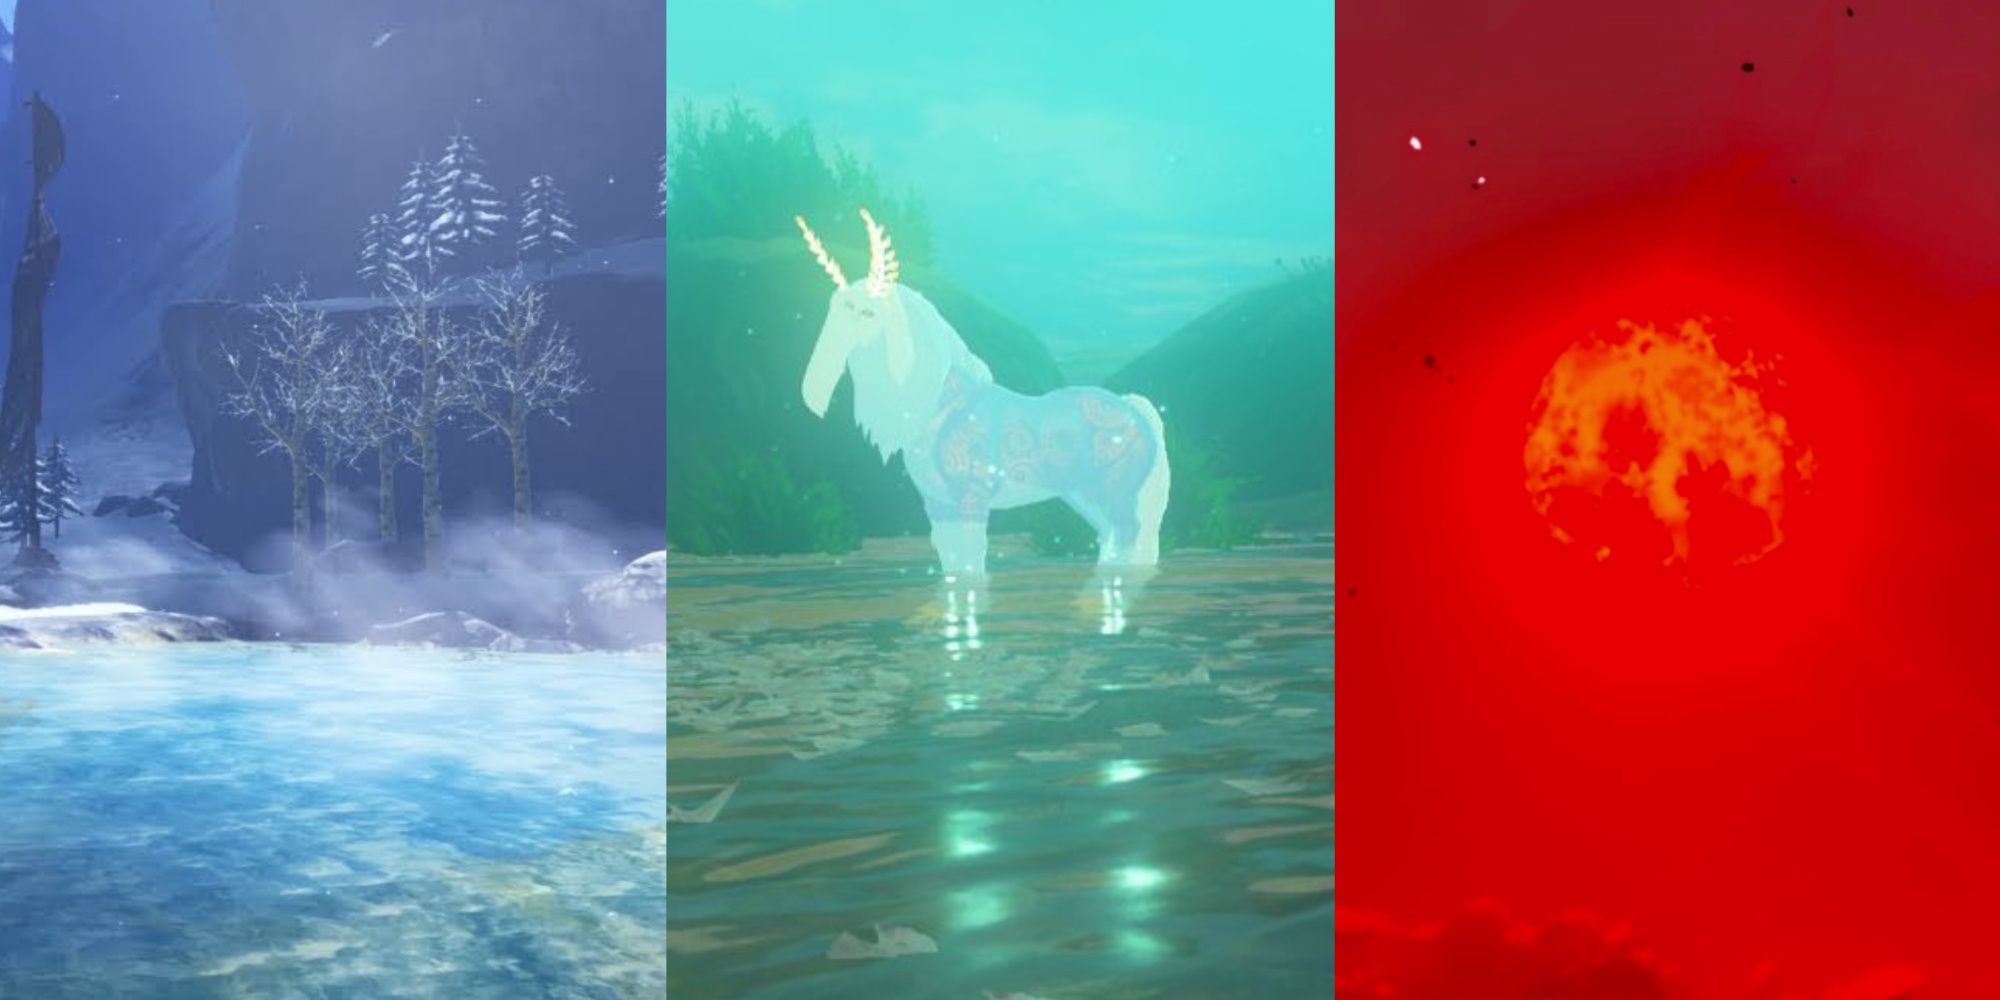 A collage showing a hot spring, a special horse, and the Blood Moon.